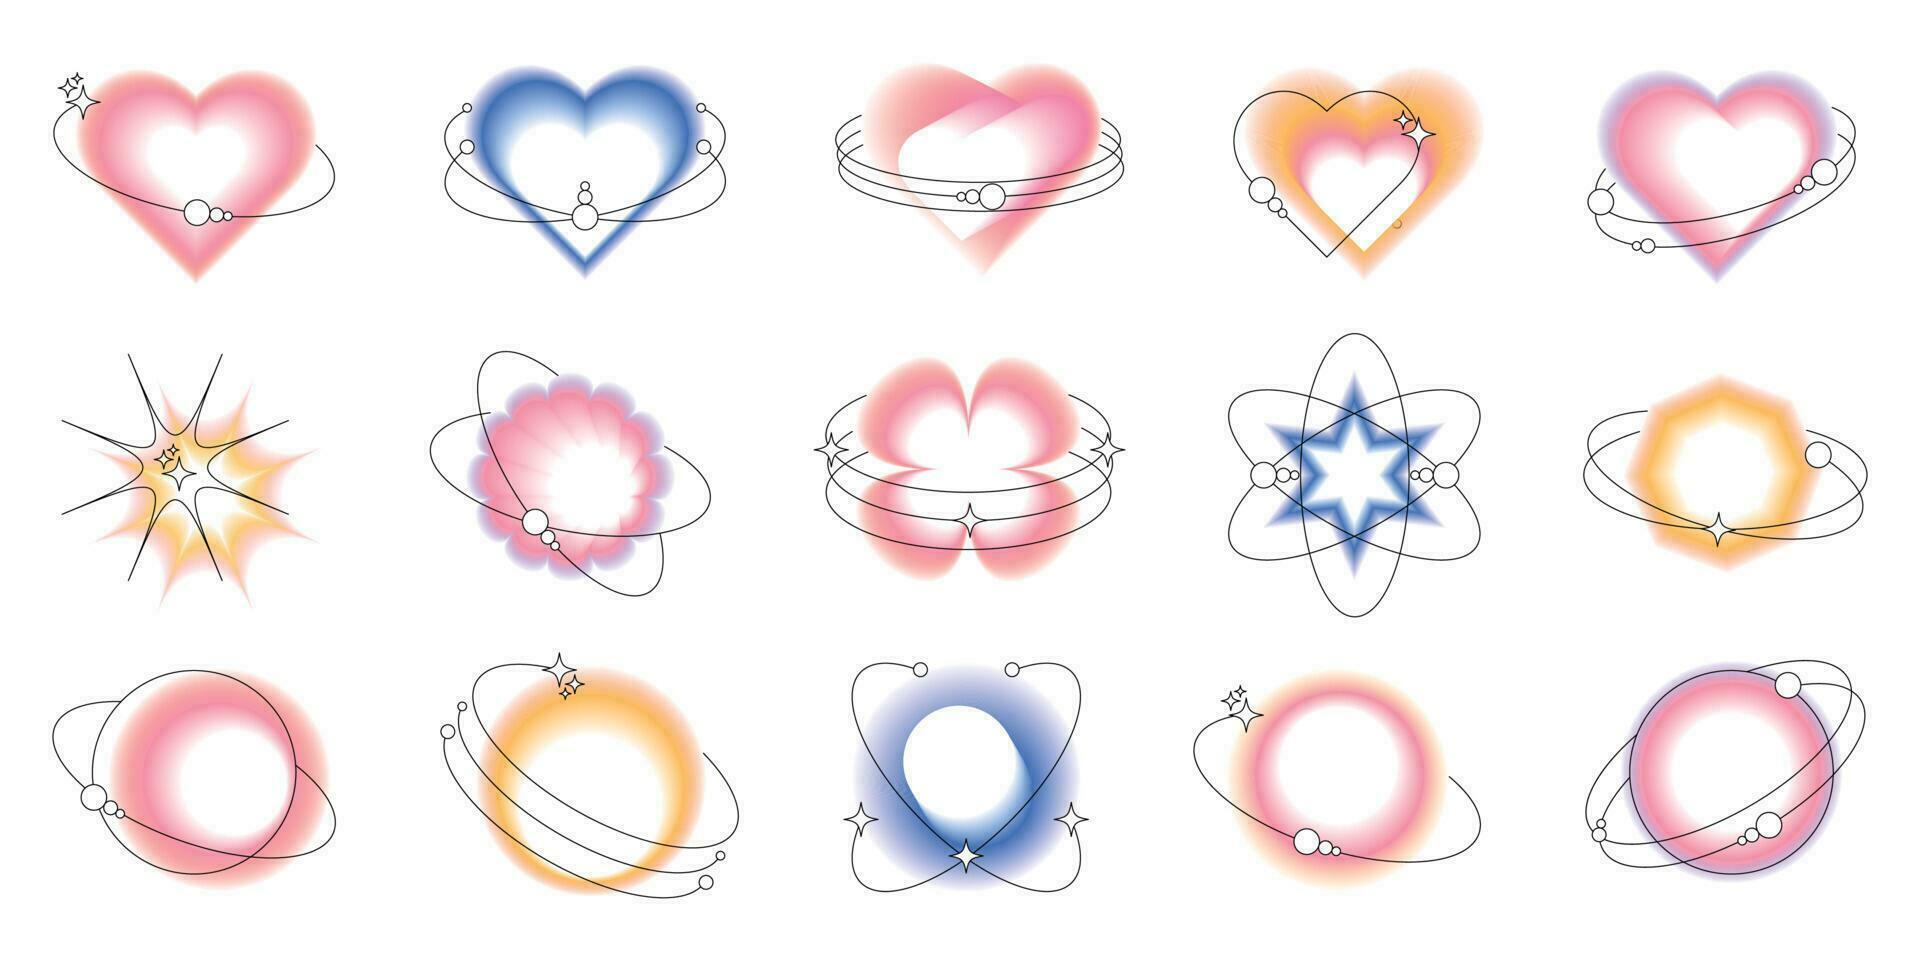 Blurred aura gradient elements, colorful soft gradients. Blur circle, heart stars, earth, various geometric shapes with blur effect vector set.